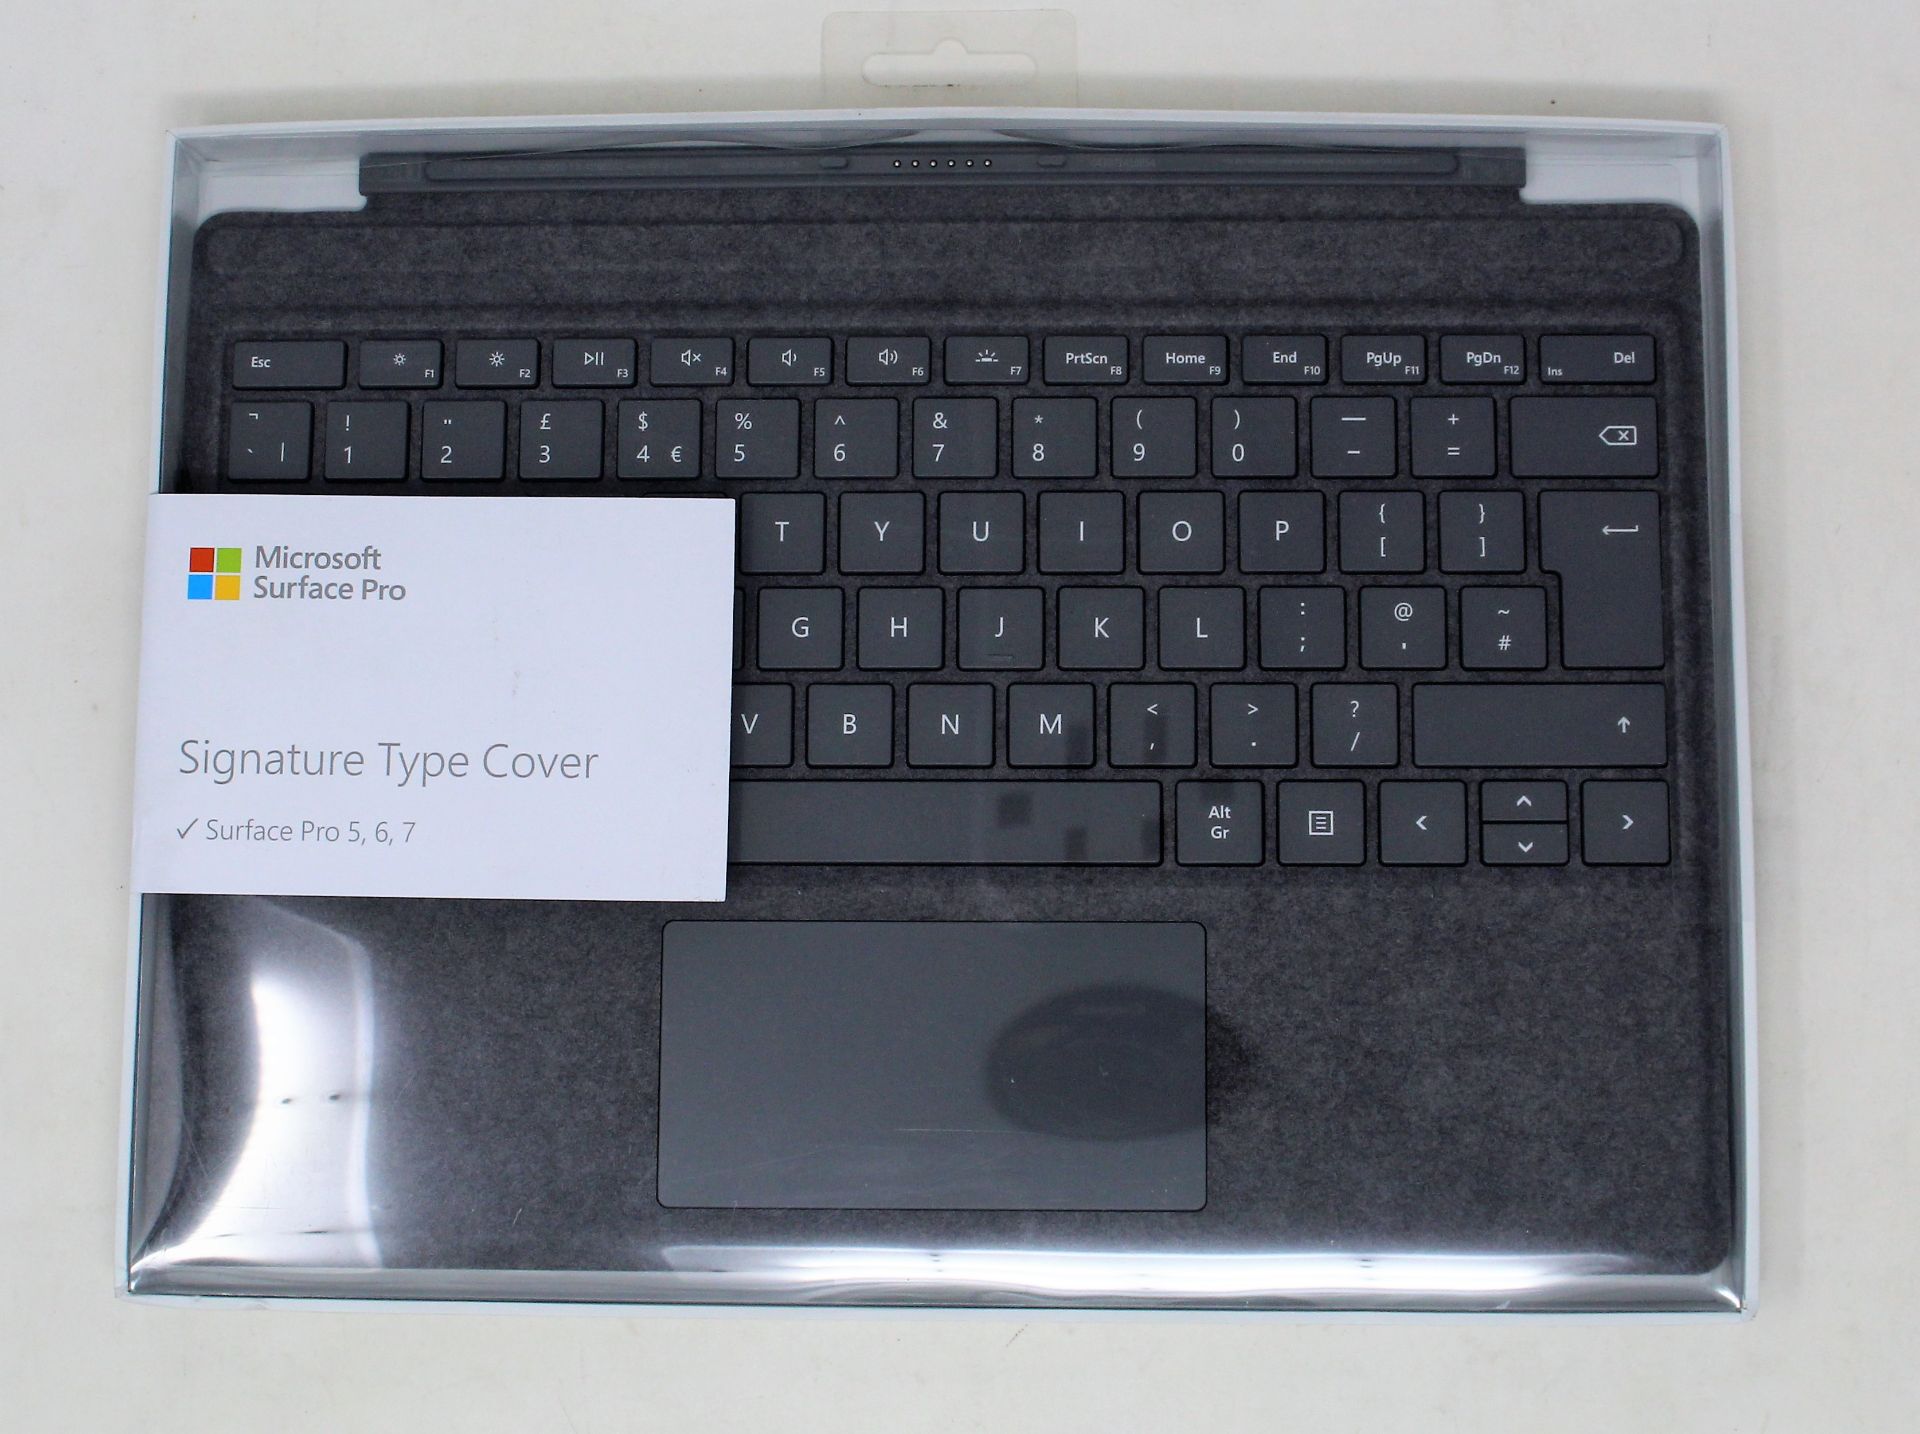 A boxed as new Signature Type Cover for Microsoft Surface Pro 5/6/7 in platinum grey.